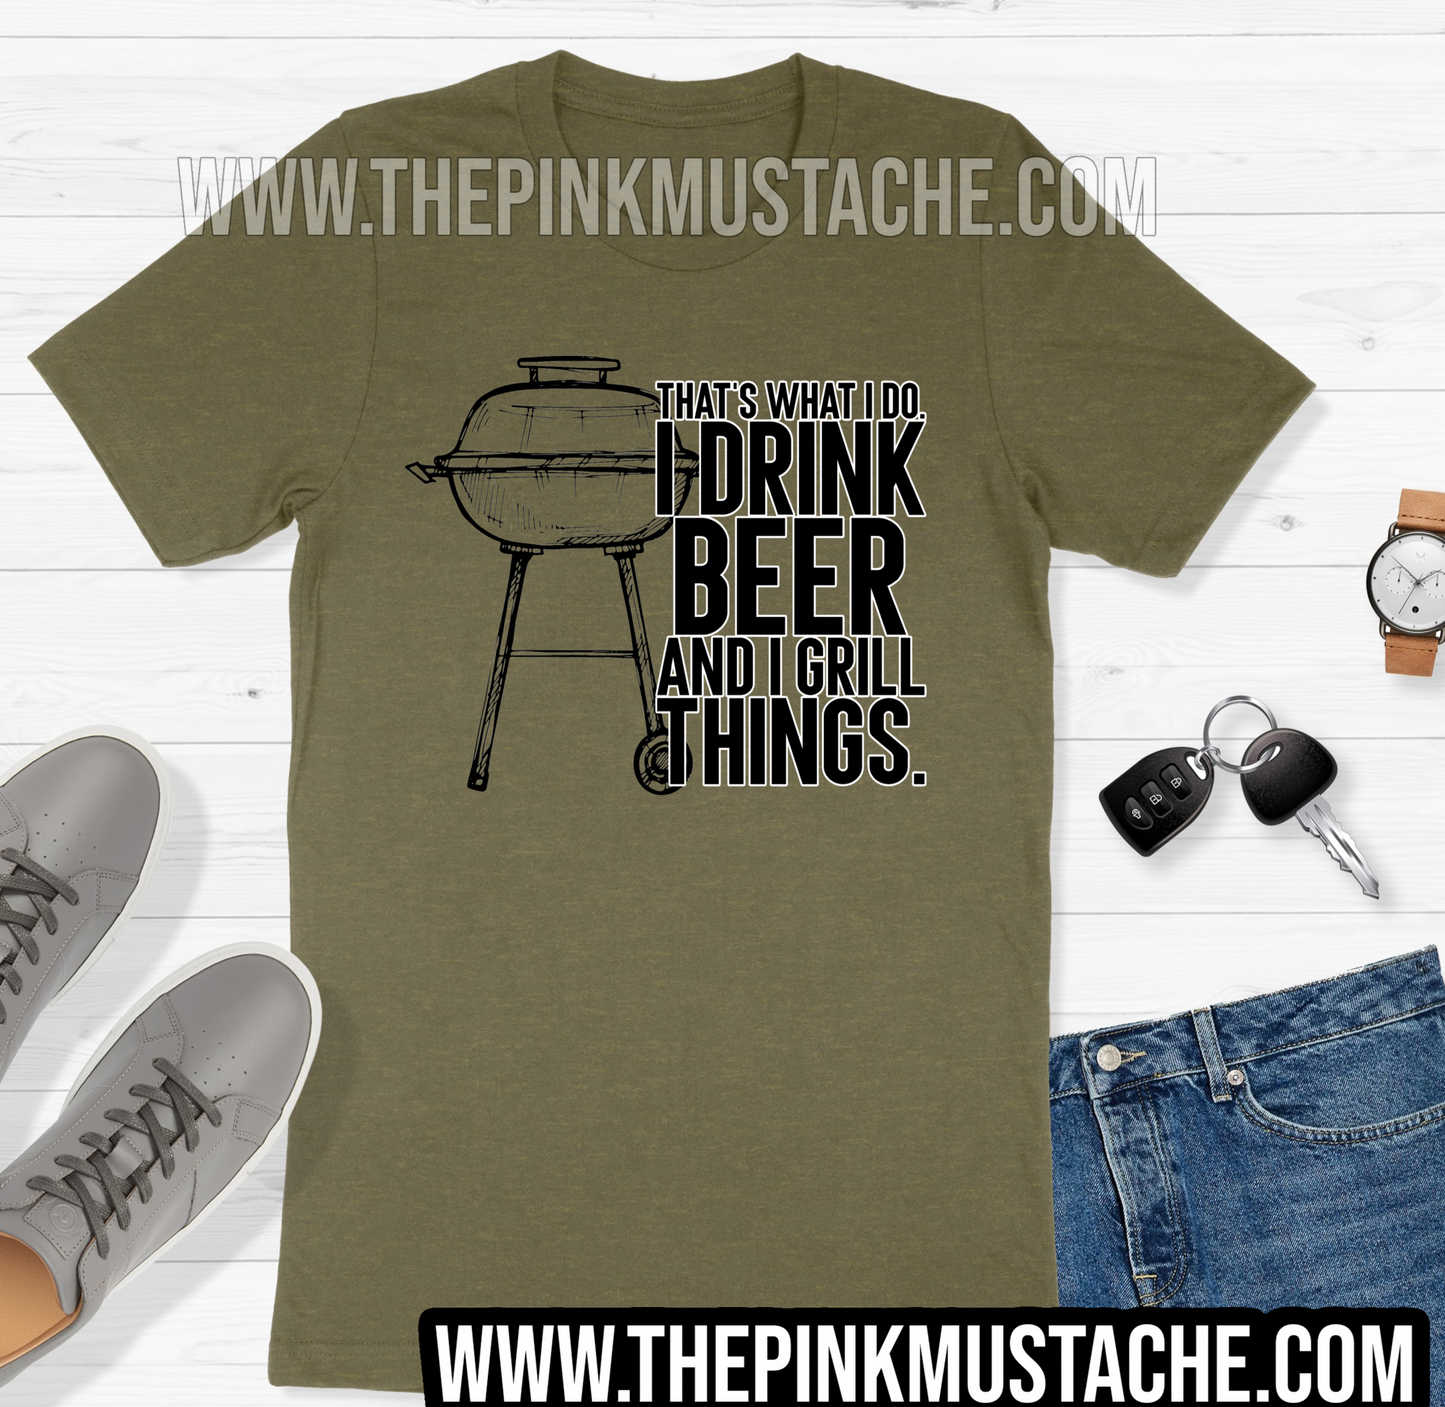 That's What I Do - I Drink Beer and Grill Things - Funny Beer Shirt For Dads / Fathers Day Shirt